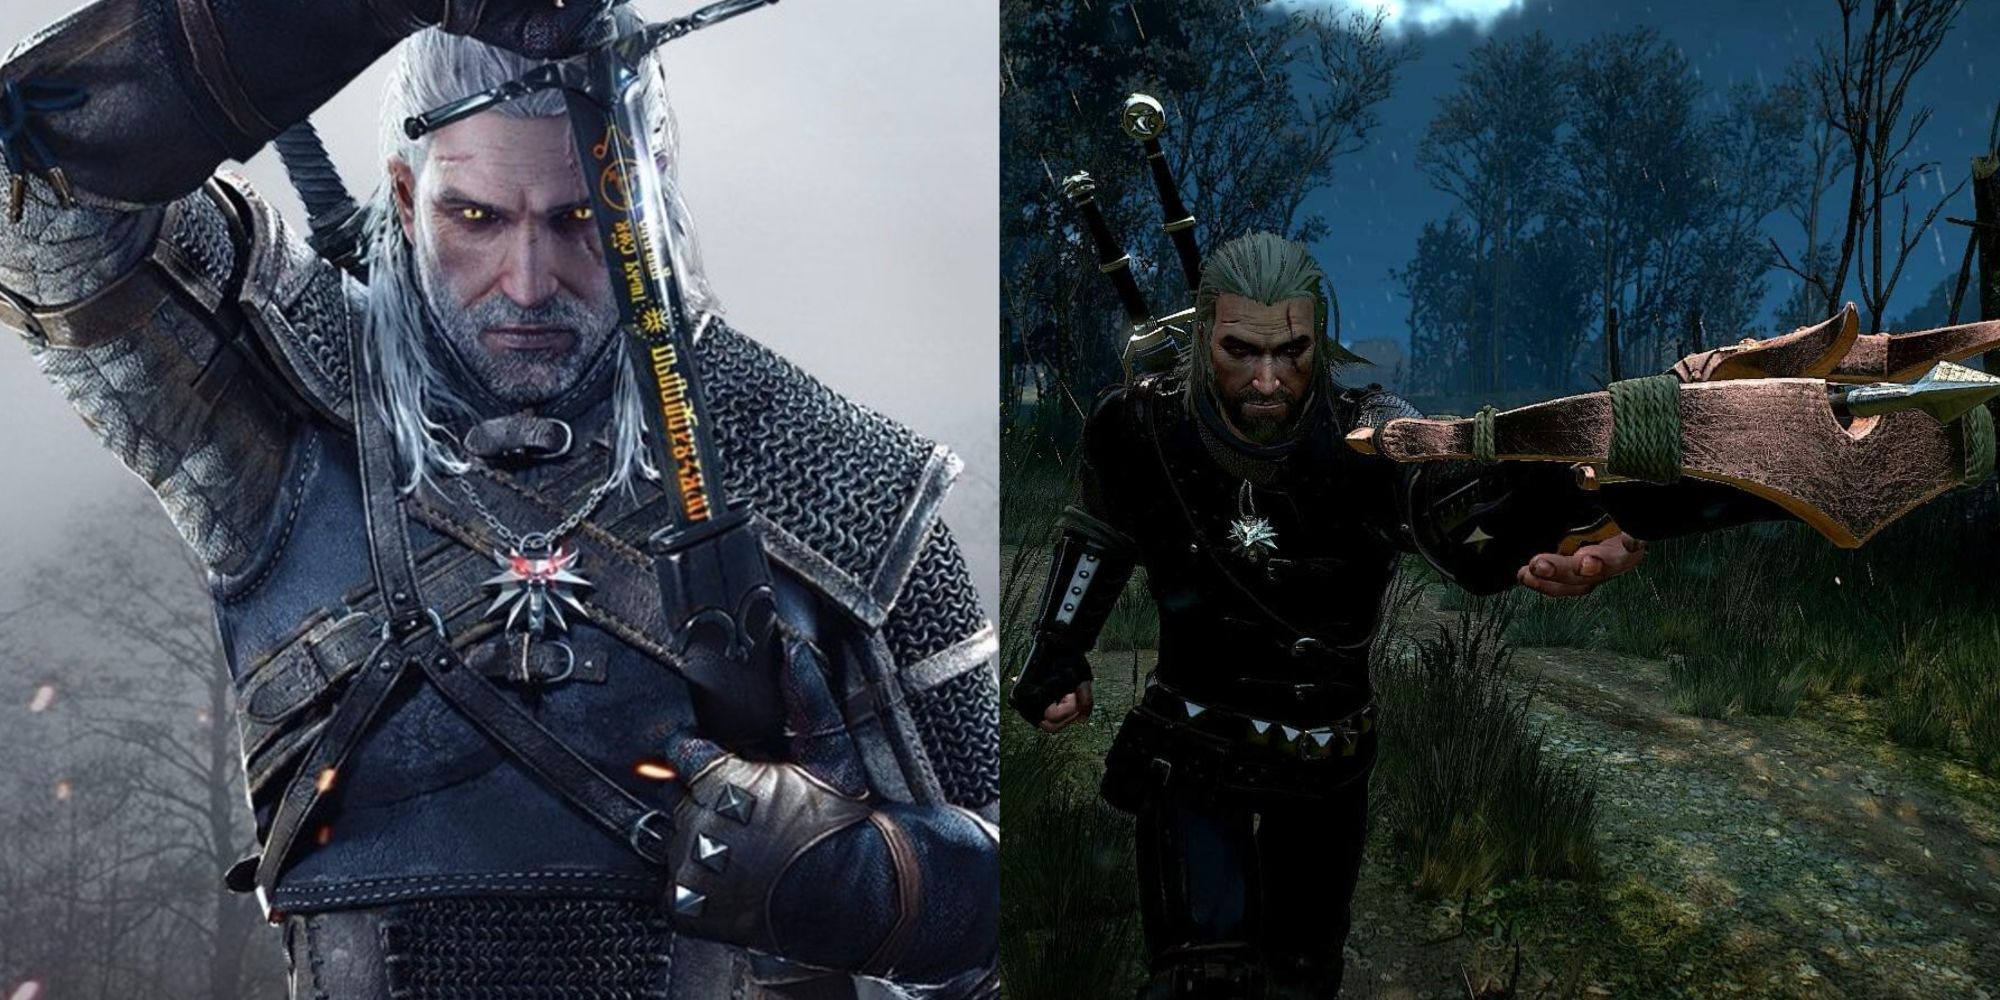 The 7 Strongest Weapons In The Witcher 3 (& The 7 Weakest)